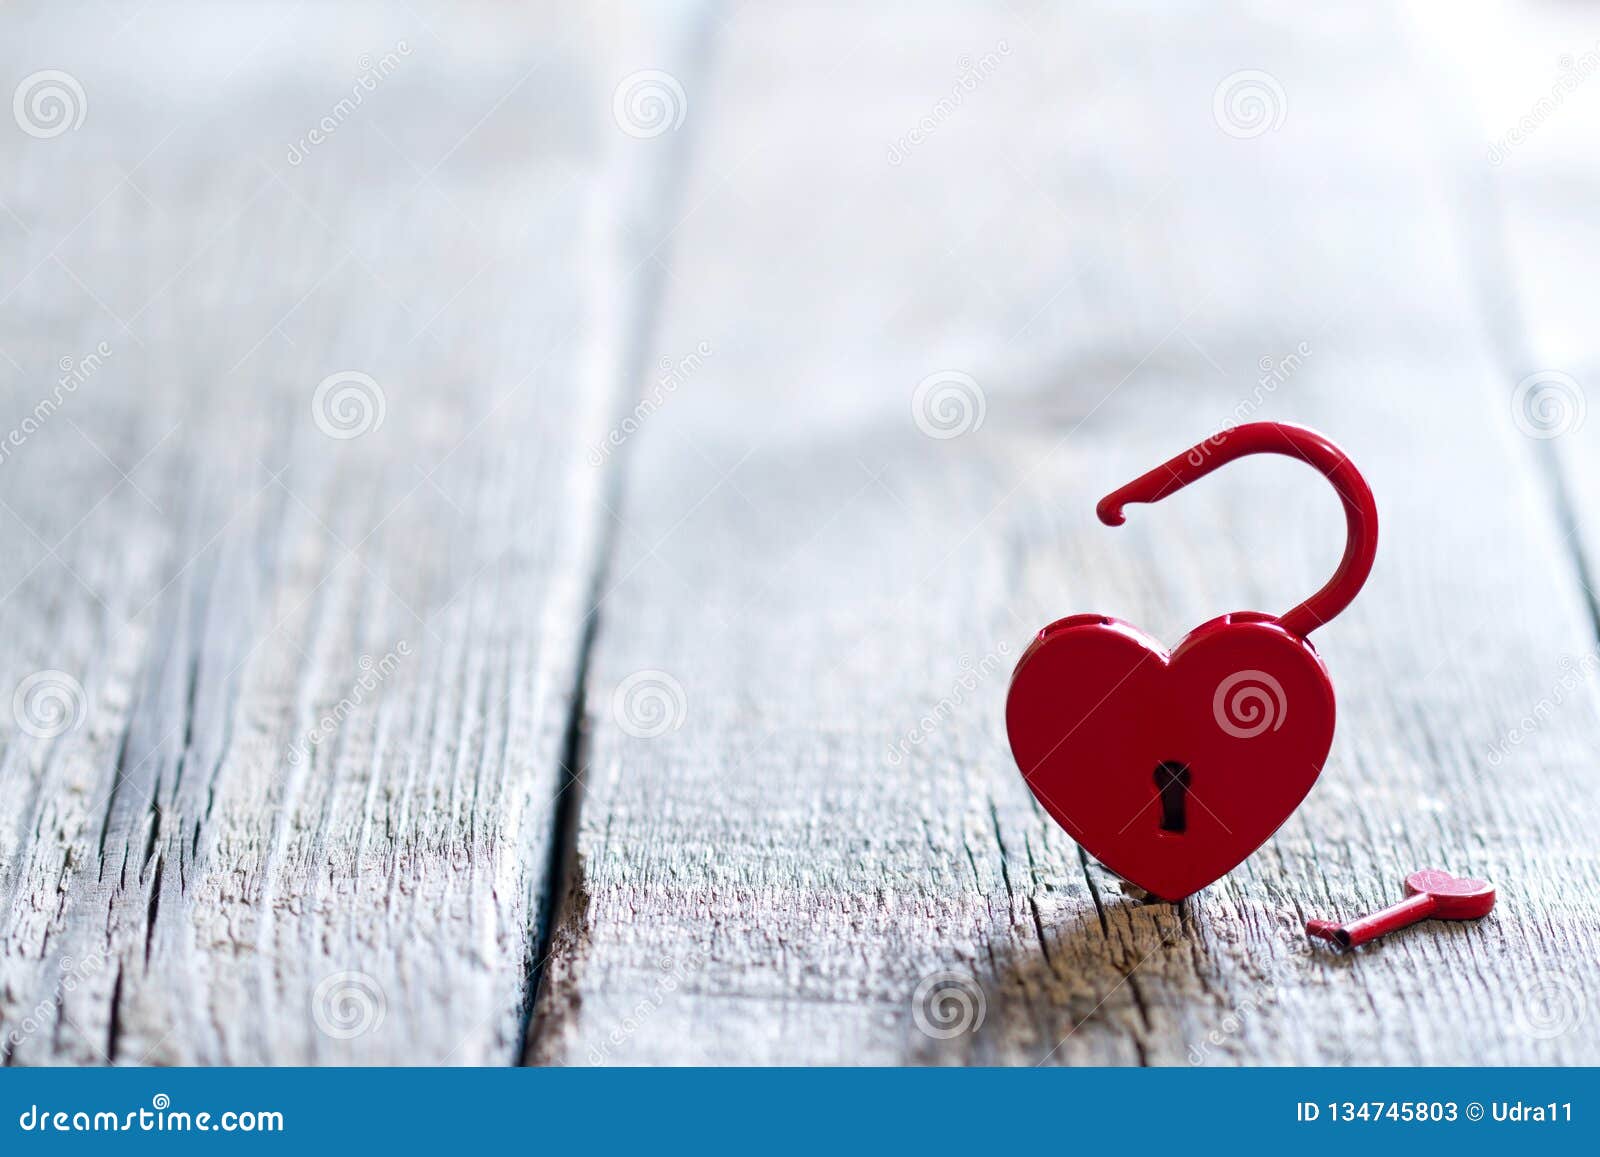 19,435,236 Beautiful Background Stock Photos - Free & Royalty-Free Stock  Photos from Dreamstime